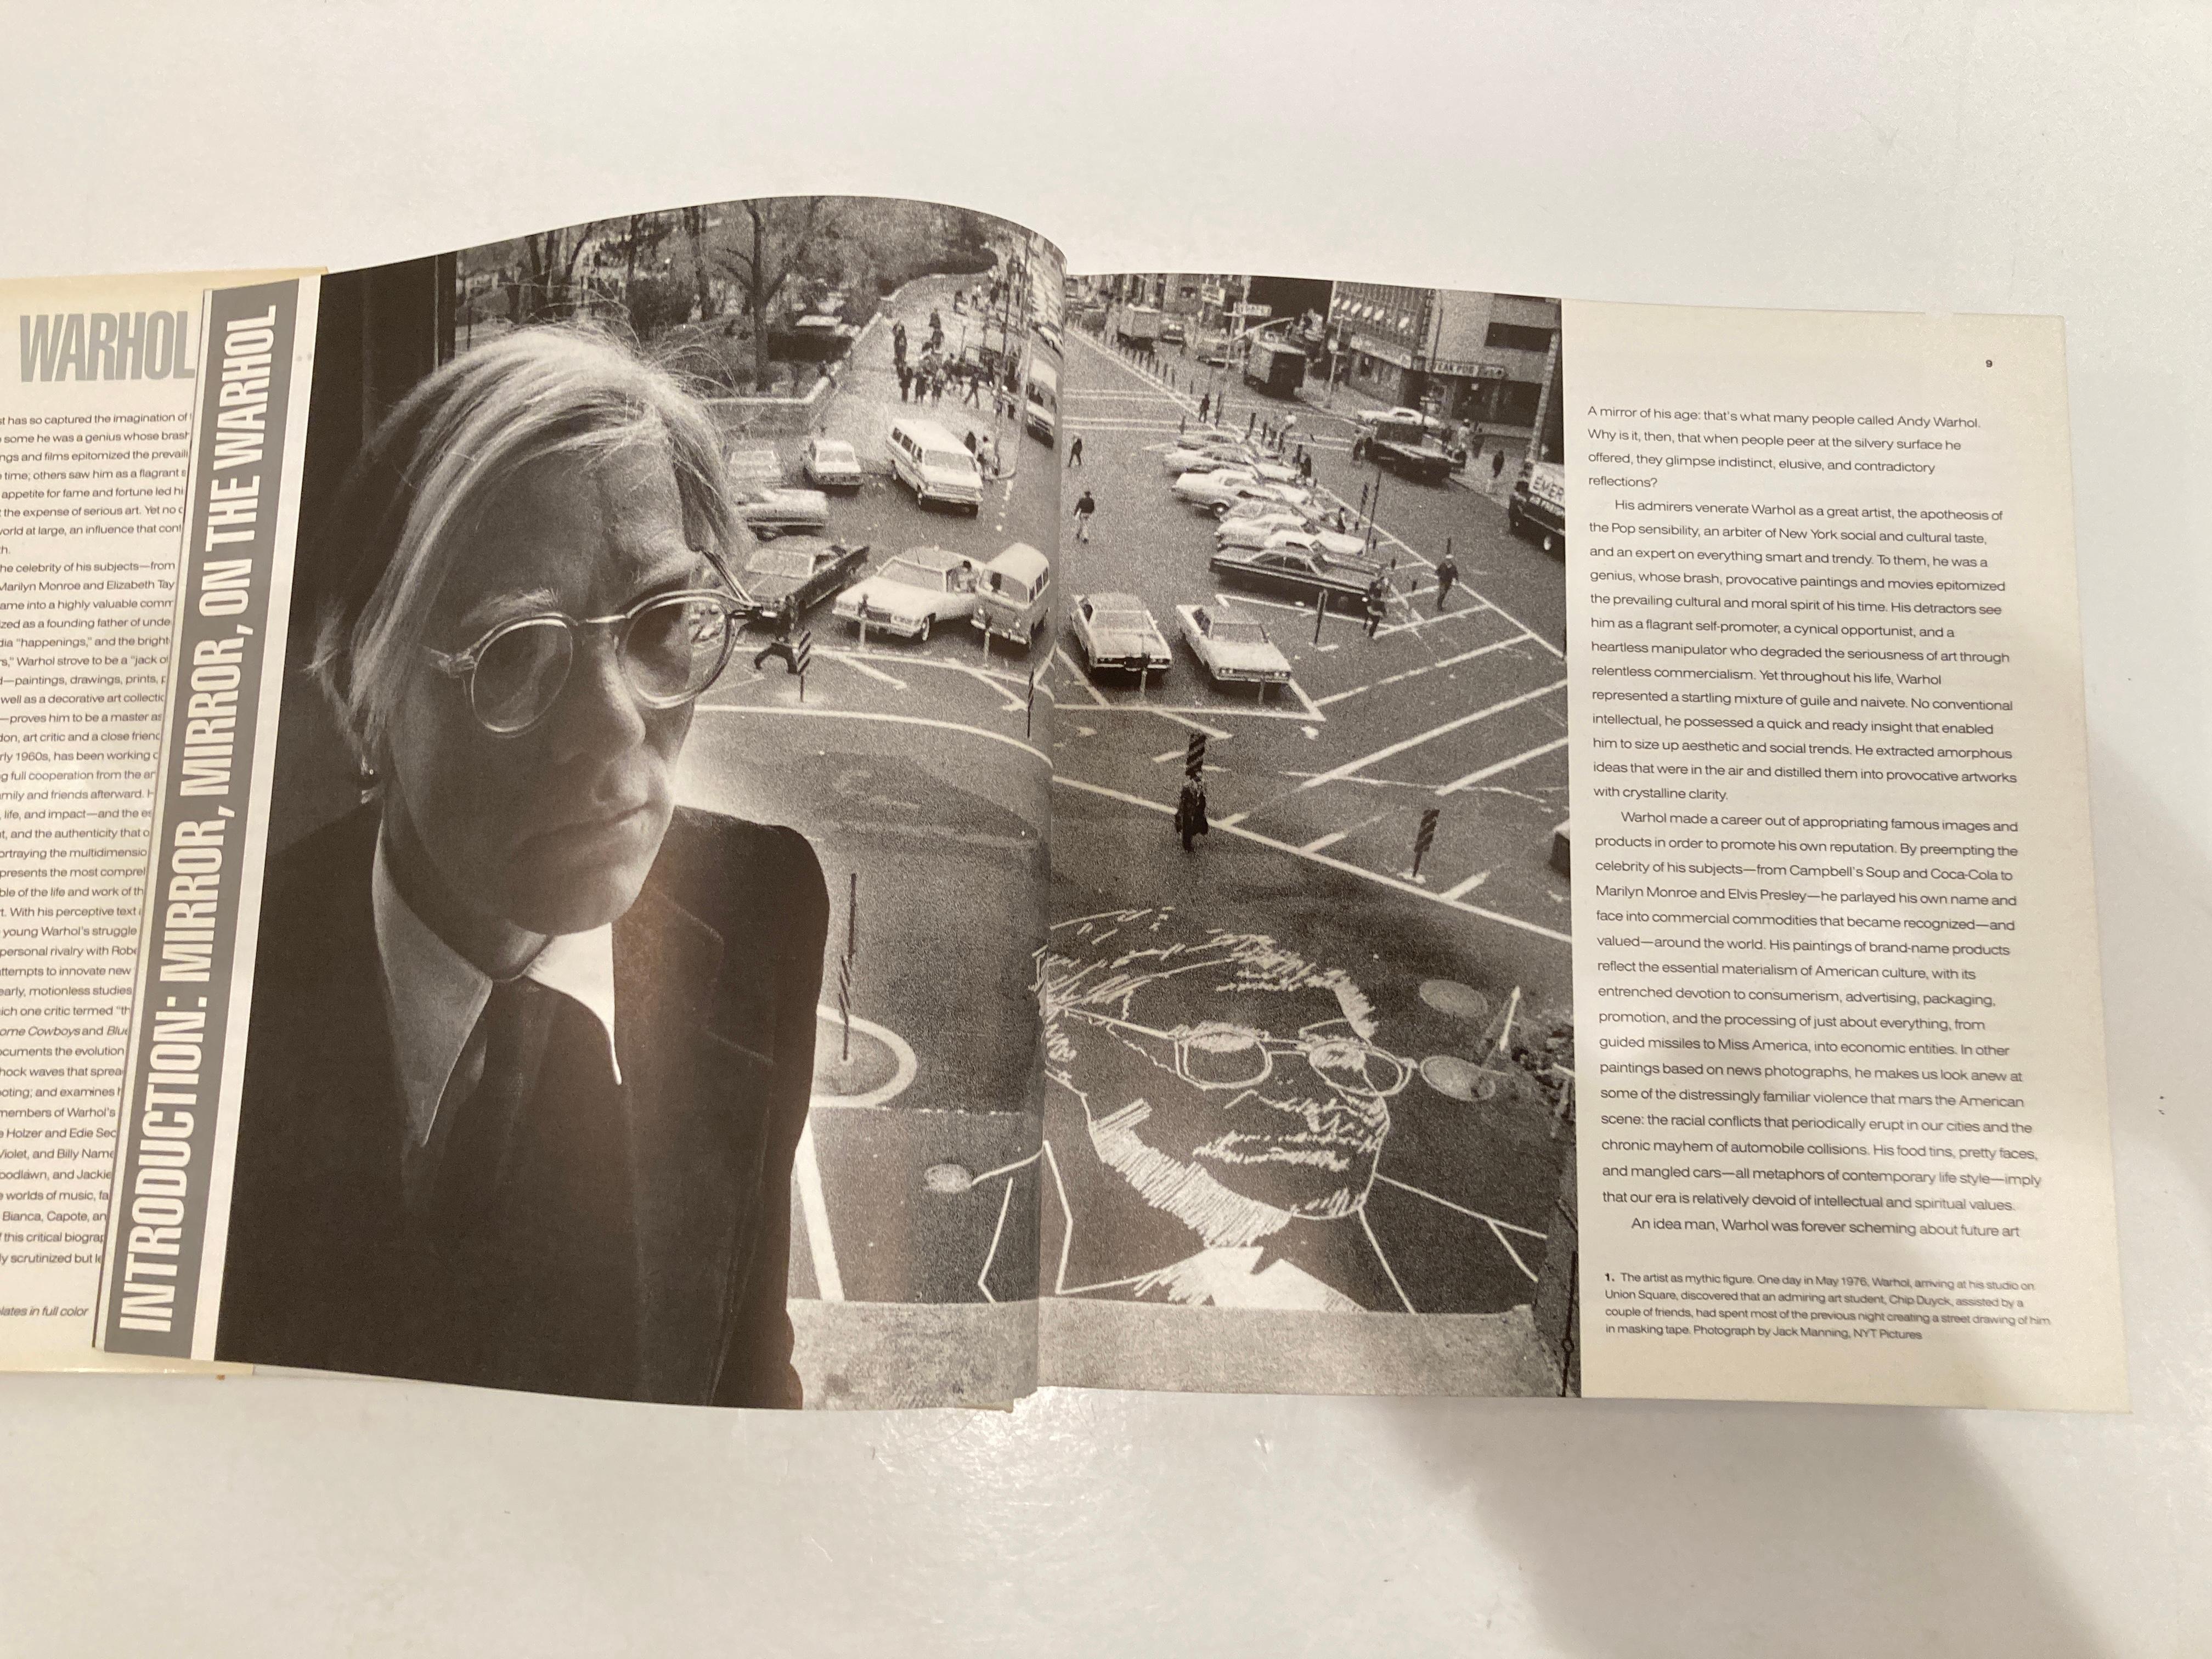 Andy Warhol by David Bourdon Collectible Poster Art Book Vintage, 1989 For Sale 3